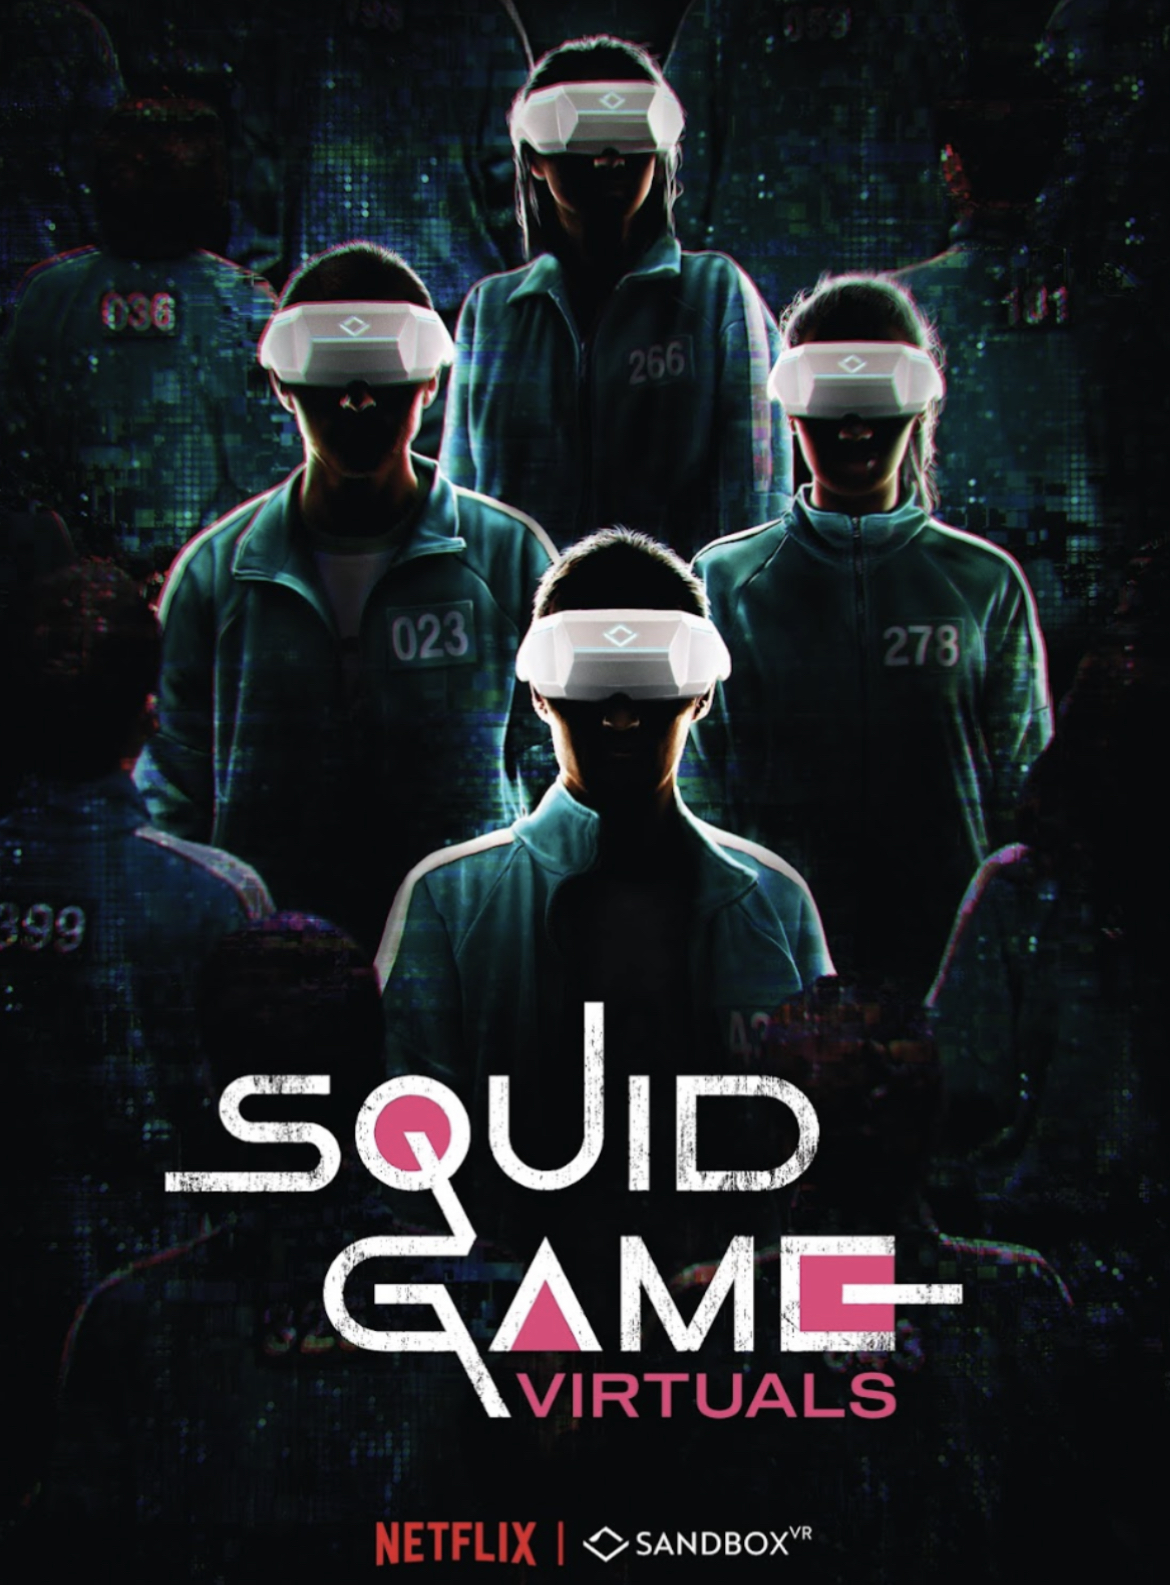 Netflix-approved Squid Game experience opening in US and UK